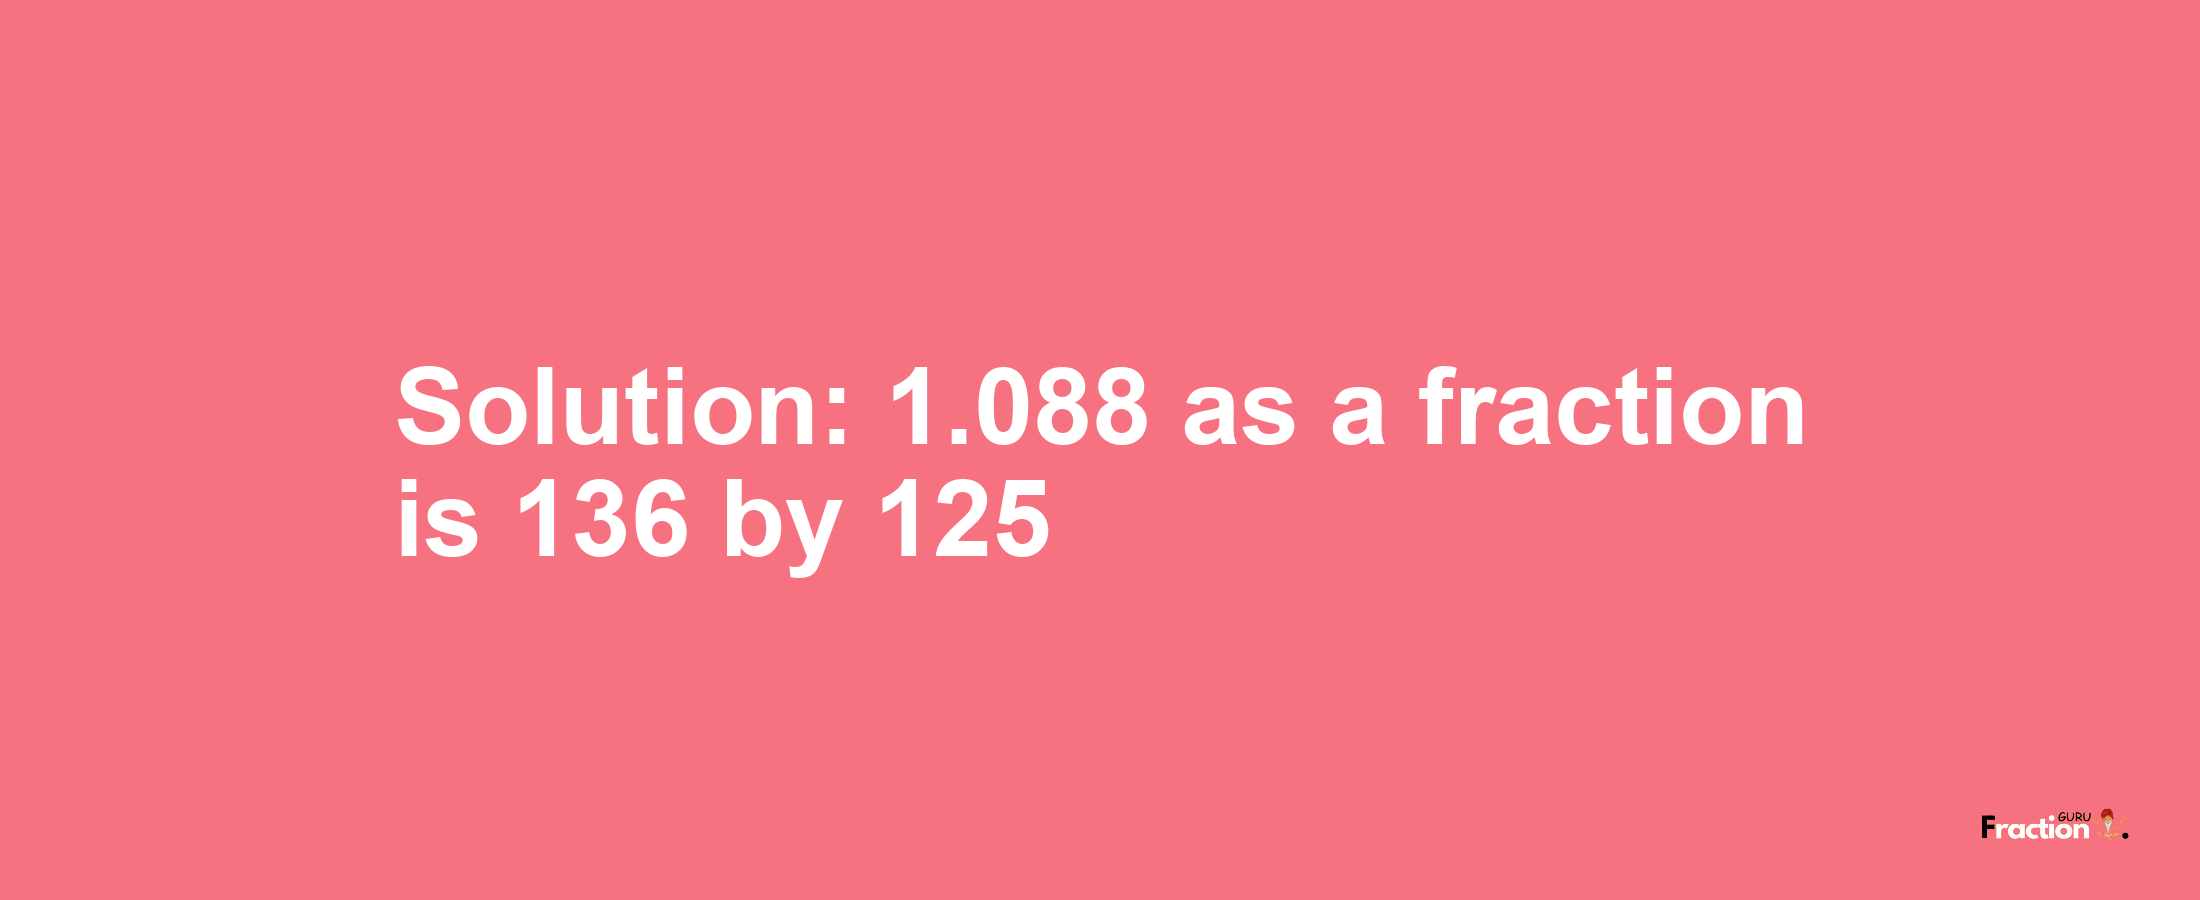 Solution:1.088 as a fraction is 136/125